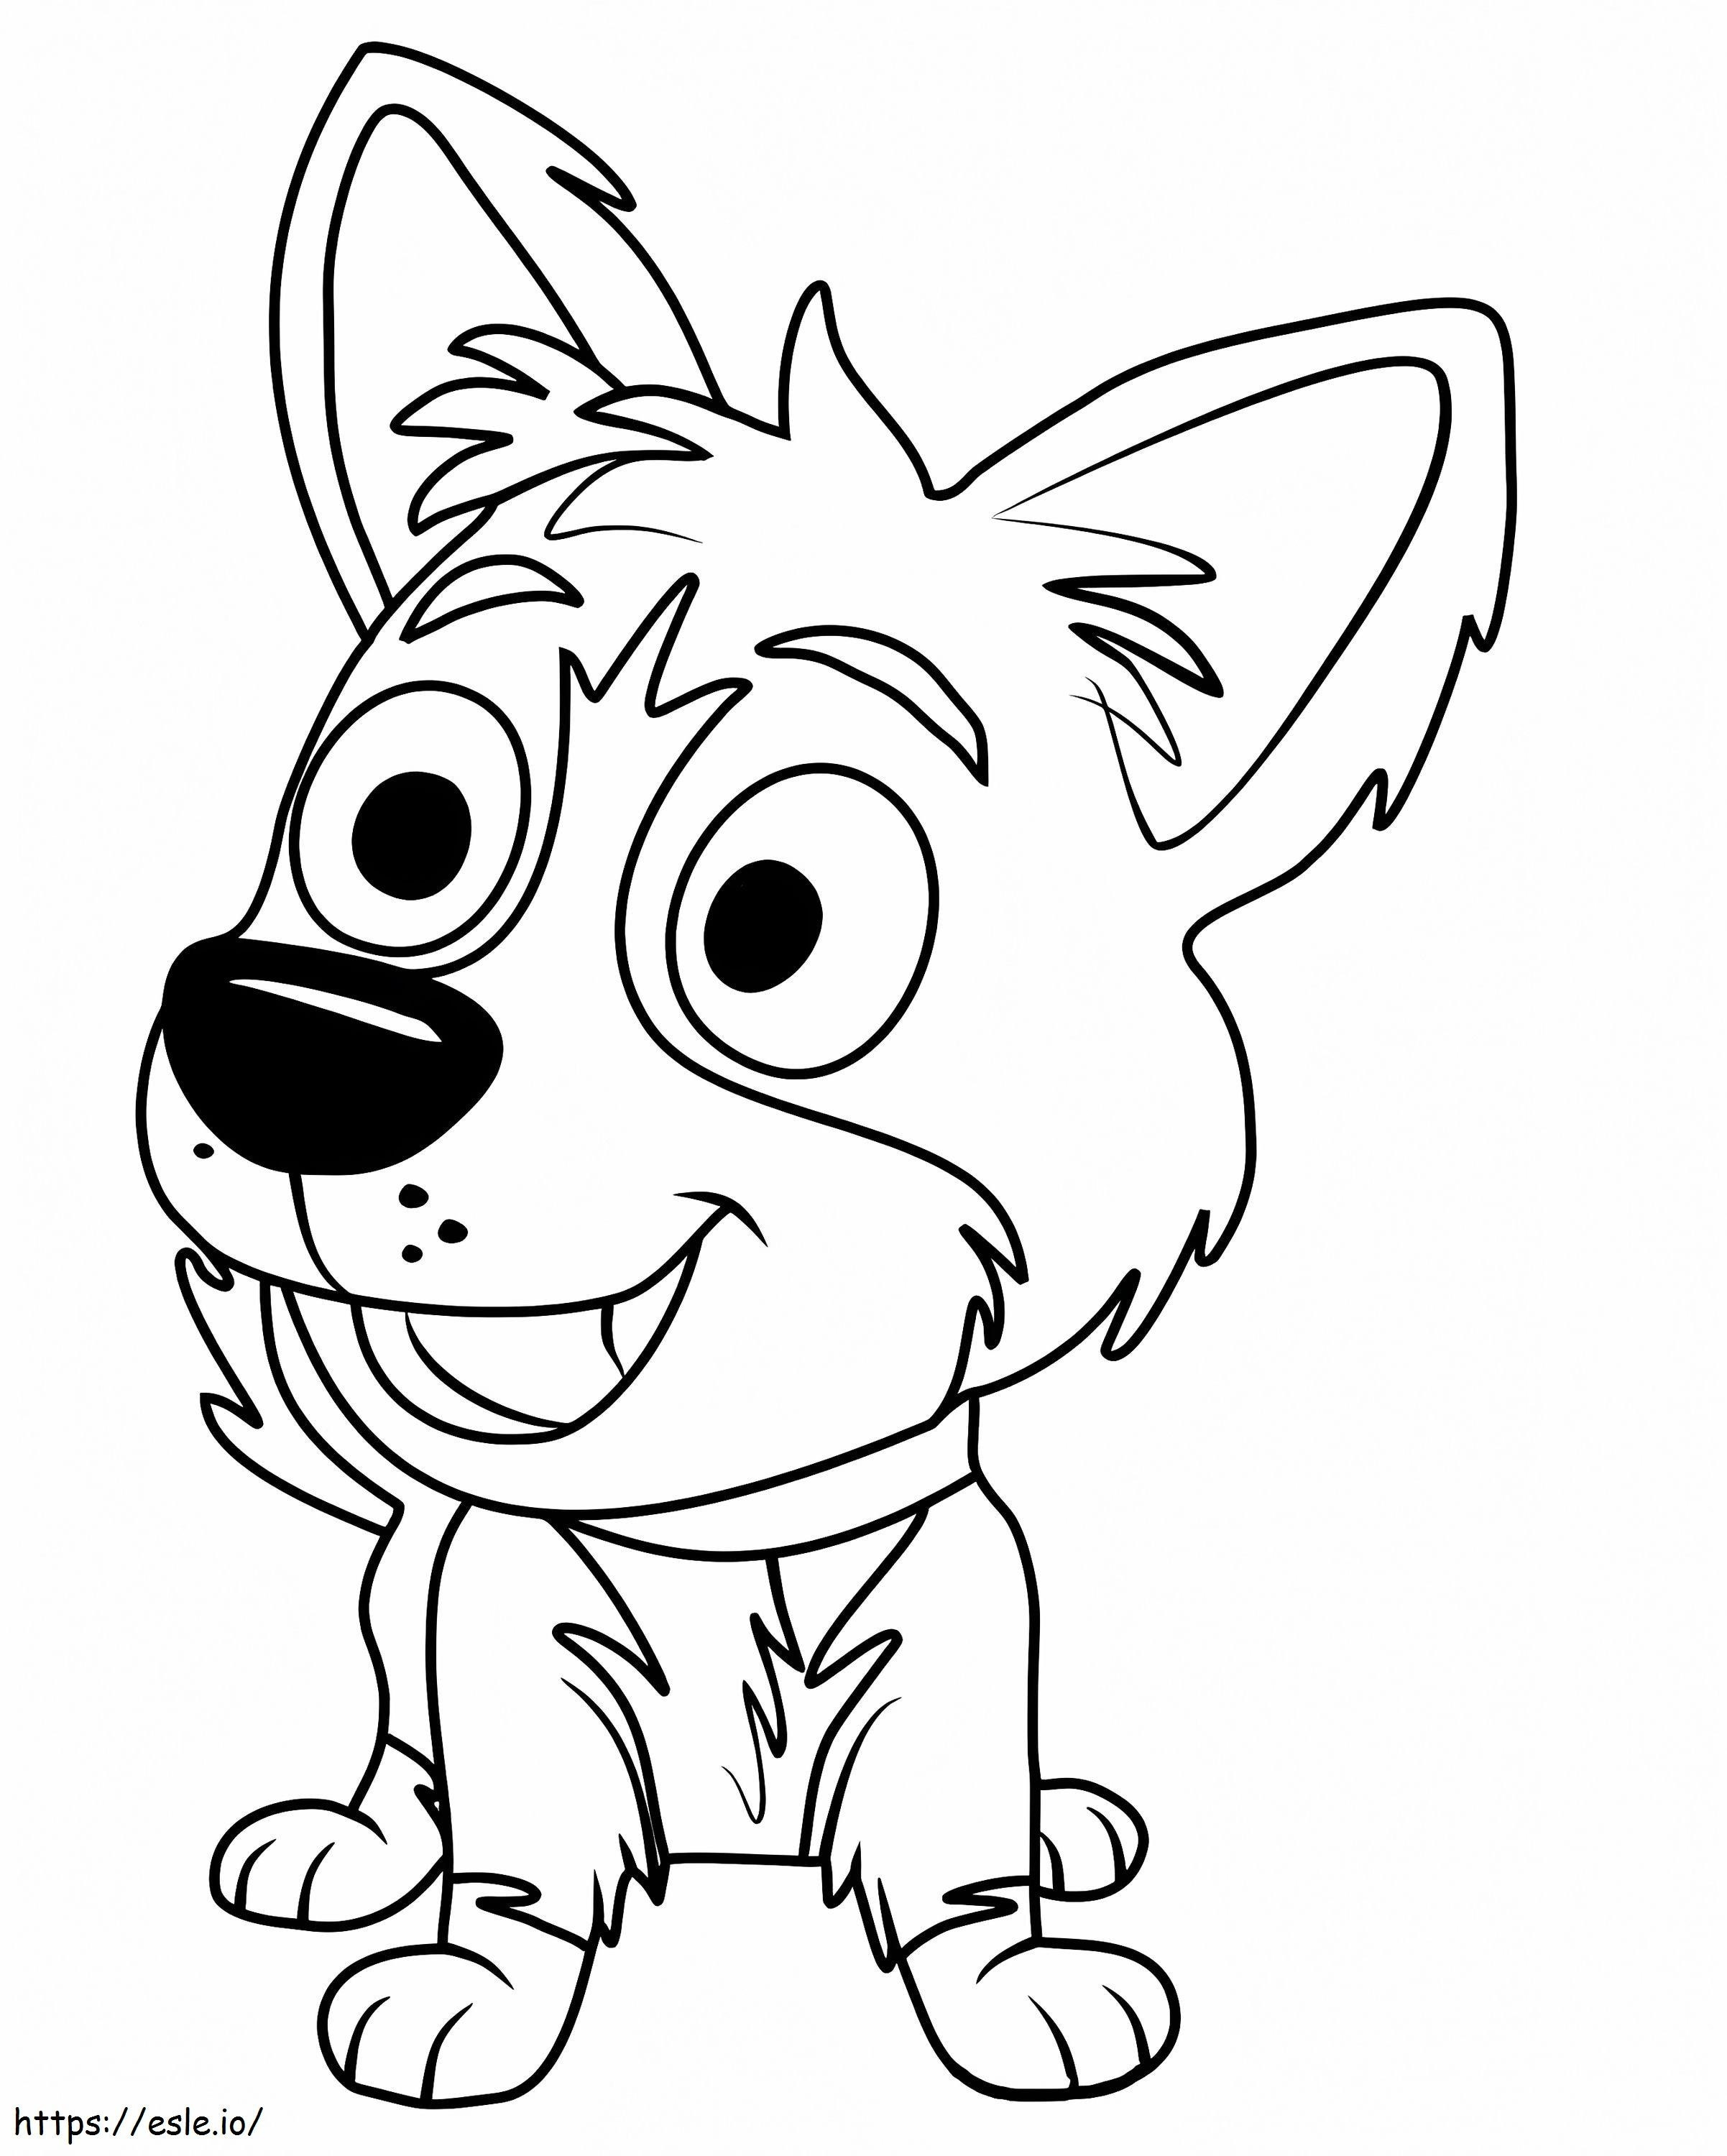 Tundra From Pound Puppies coloring page